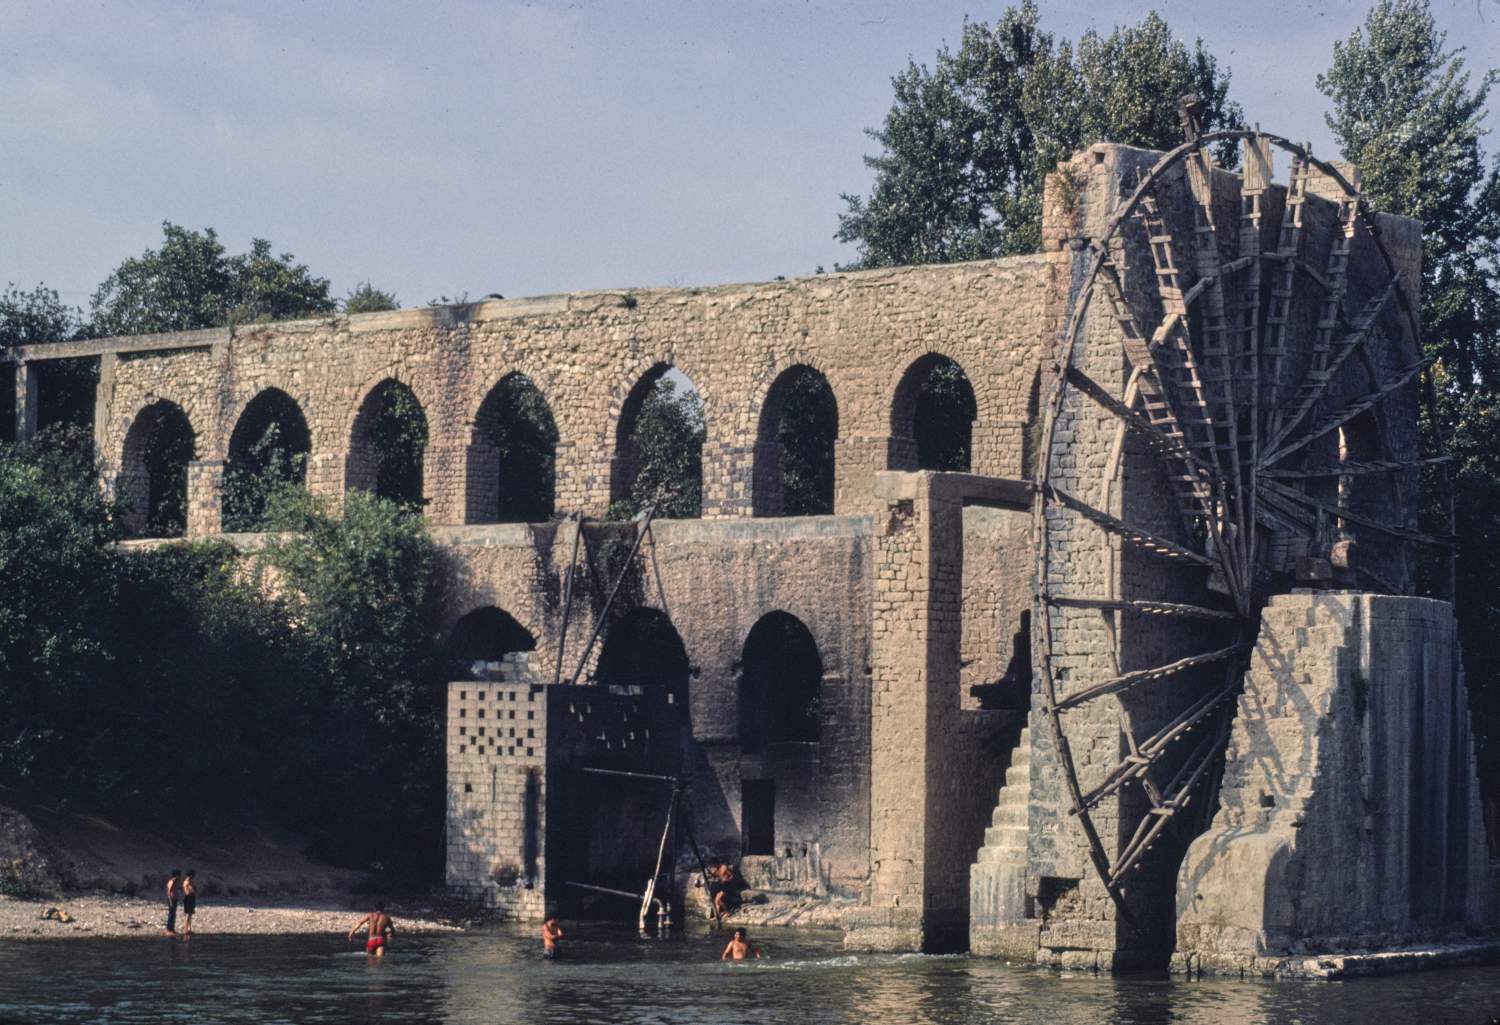 Waterwheel and aqueduct on the Orontes River in Hama, Syria.